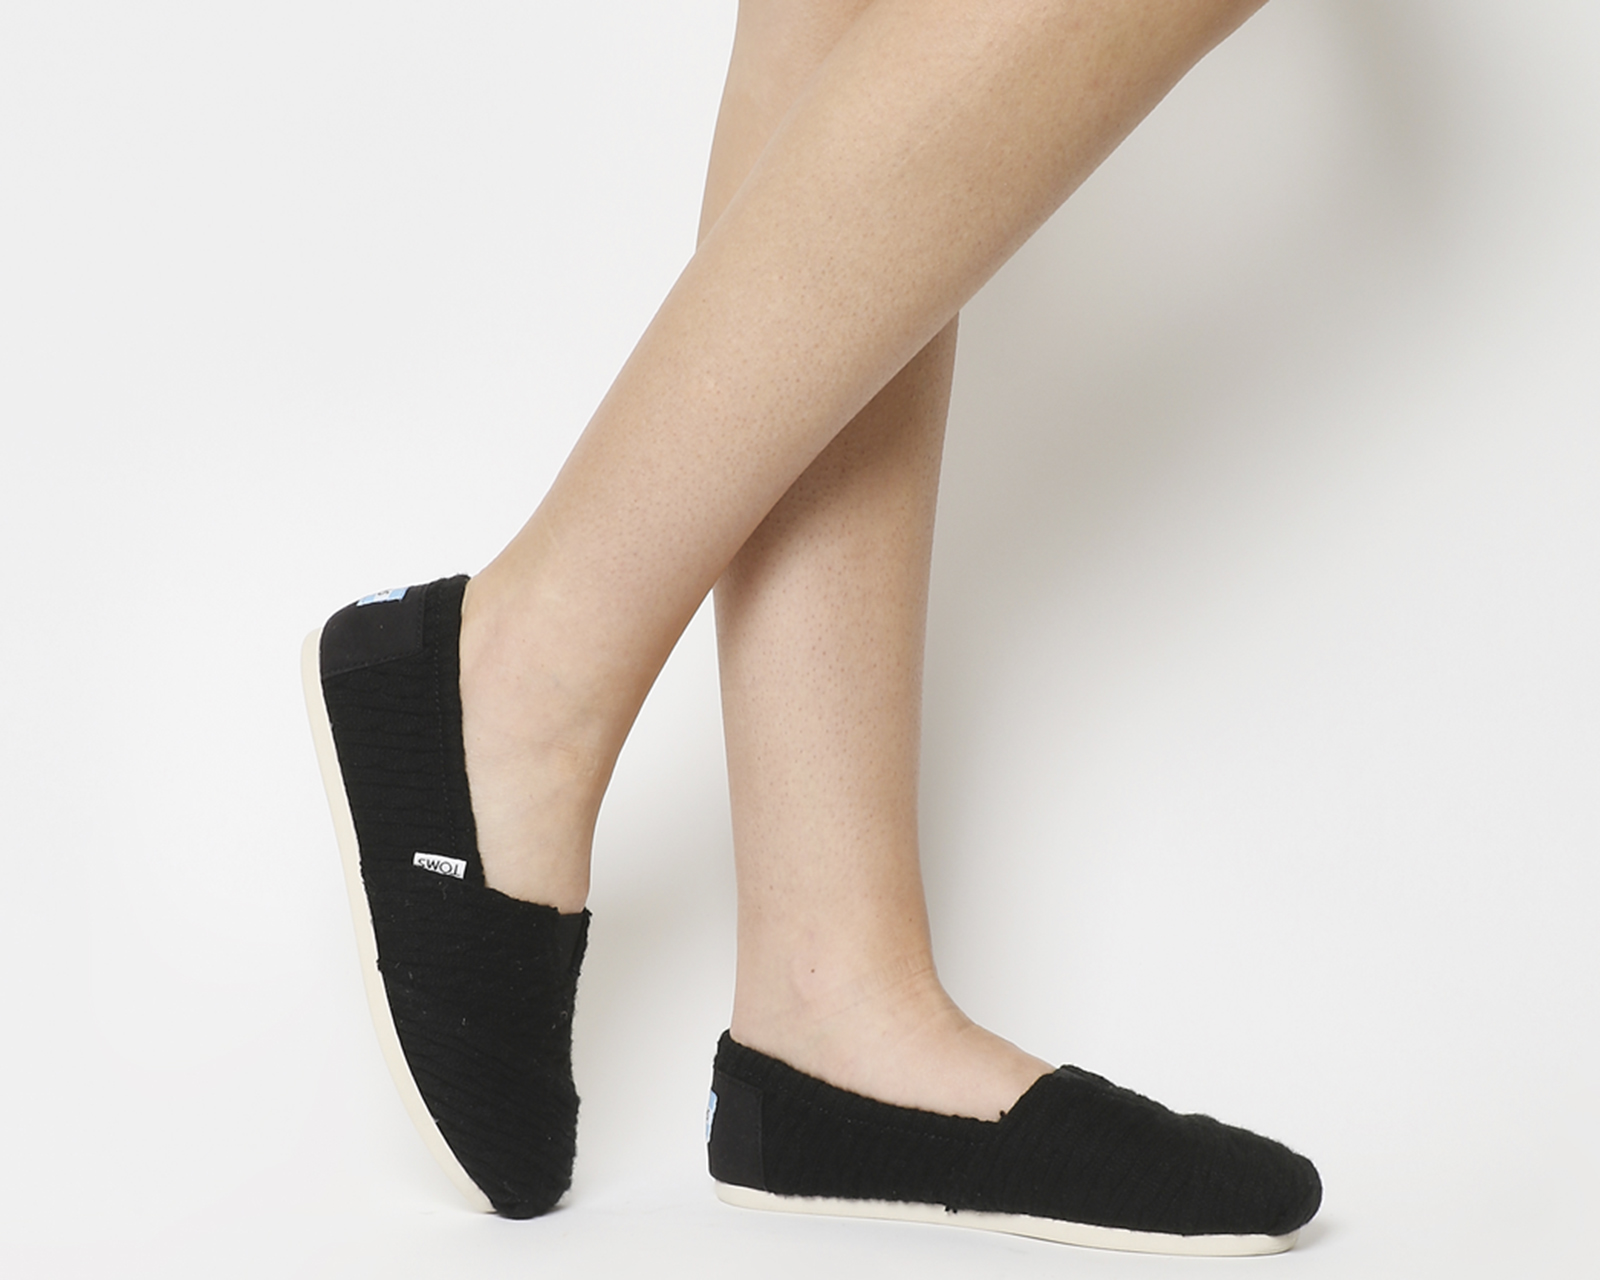 shearling slip on shoes